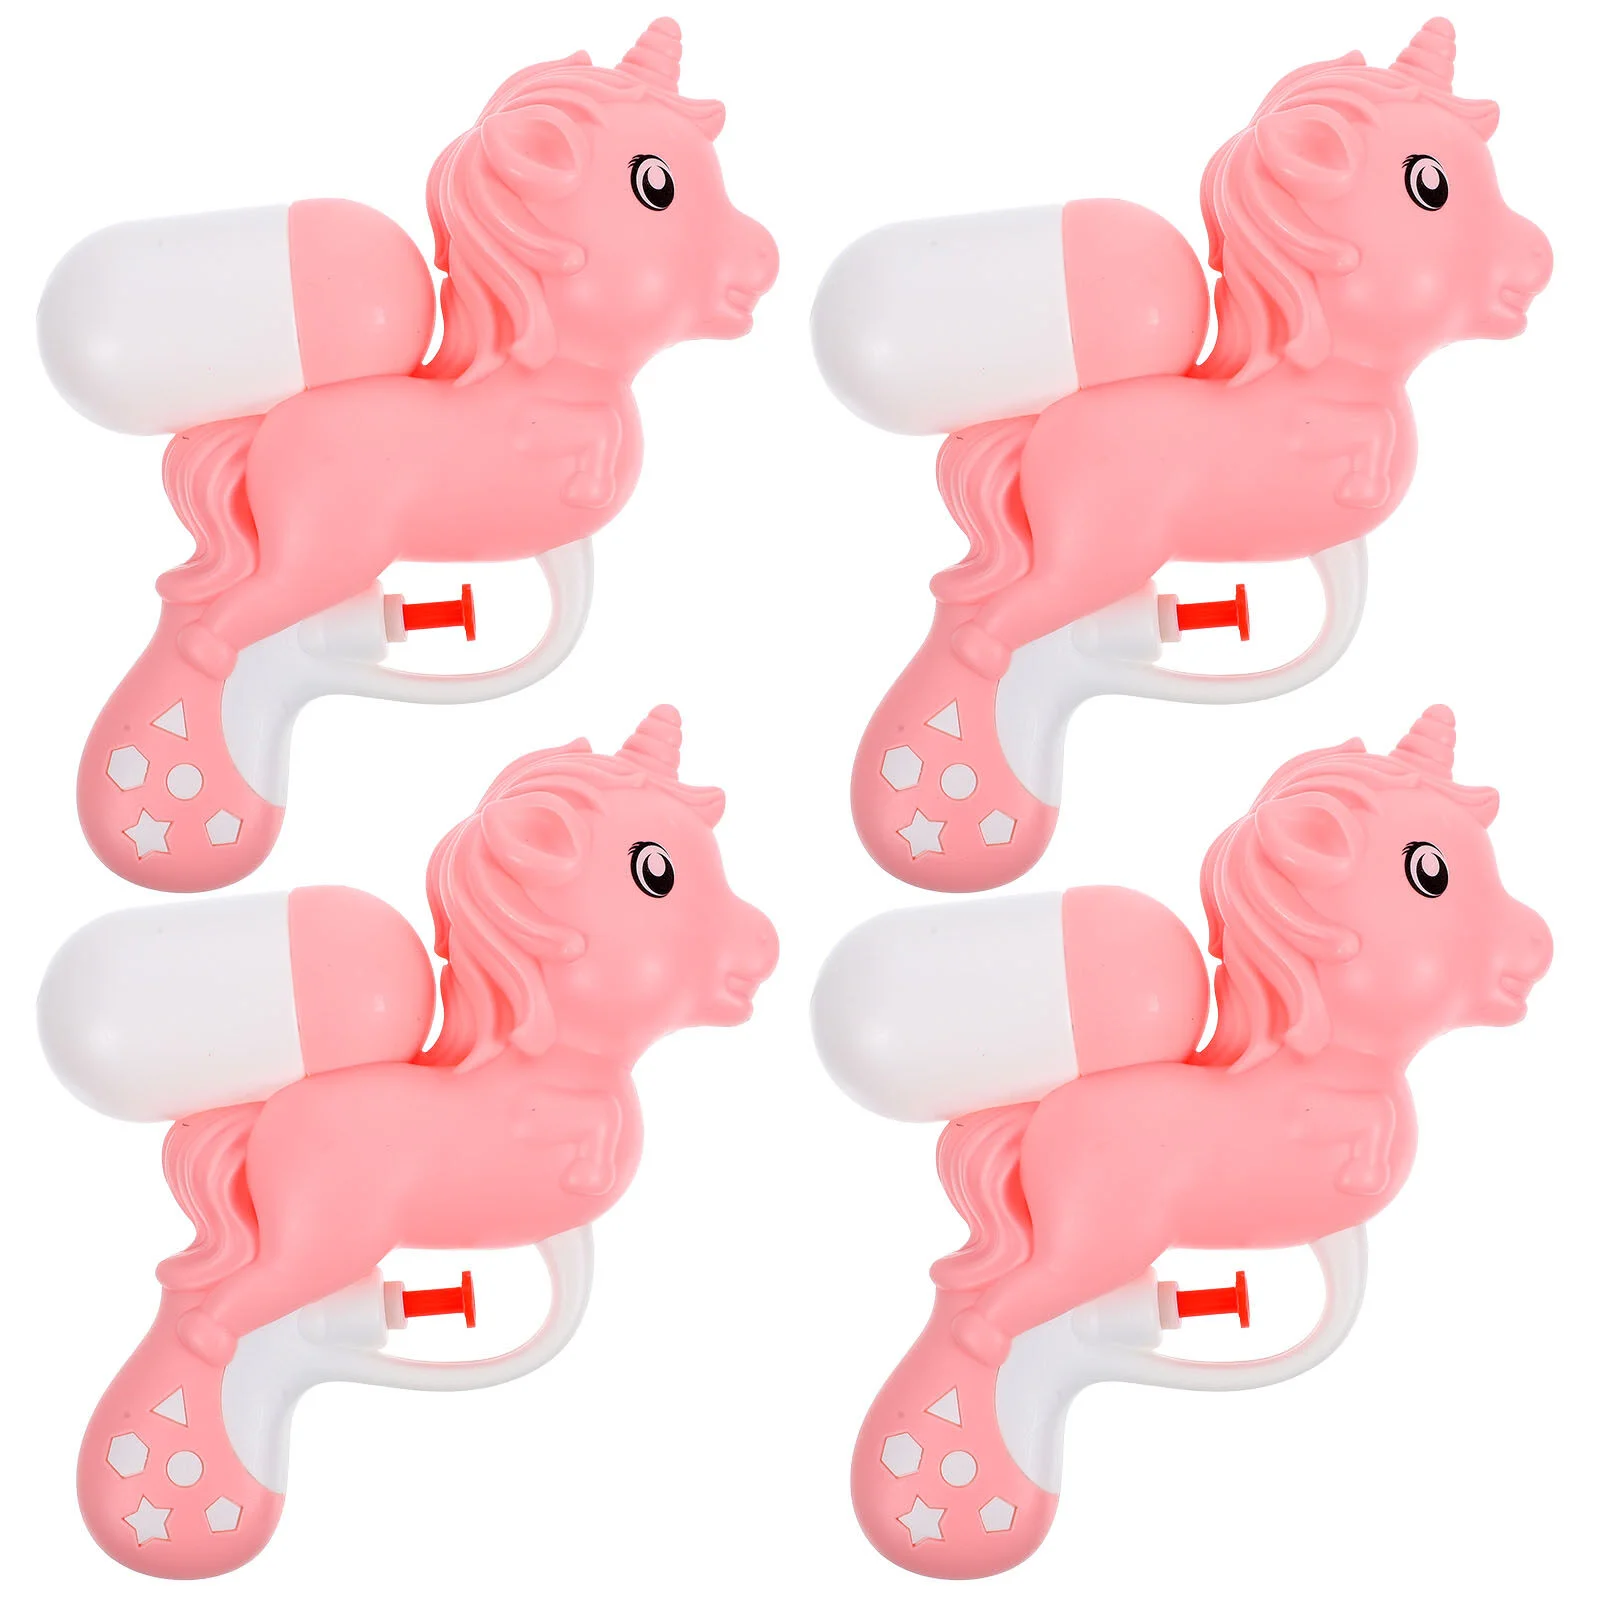 

4 Pcs Beach Water Shooter Toy Toddler Toys Summer Kids Party Favors Plastic Shooting Pool Guns